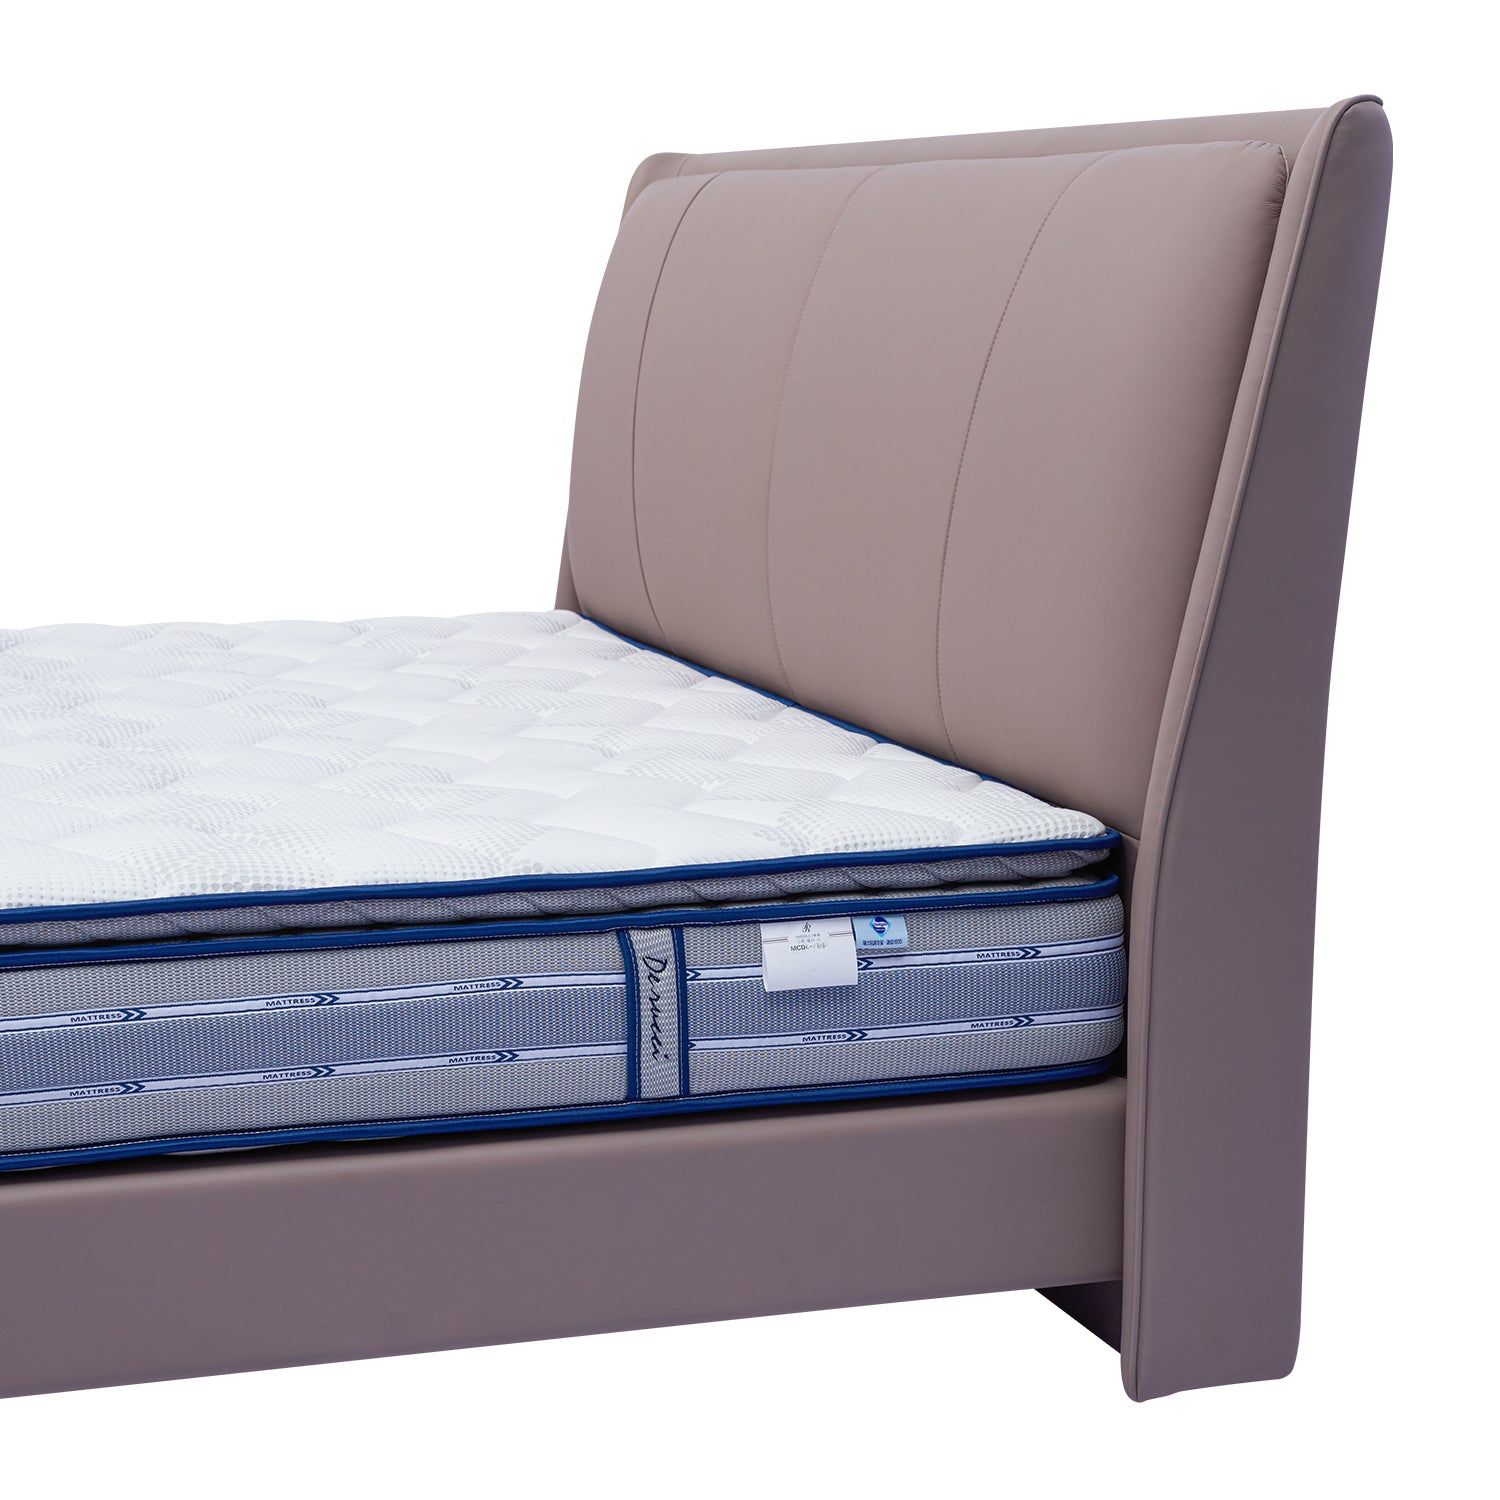 DeRUCCI Bed Frame BOC1 - 018 with beige upholstered headboard and high-quality mattress with blue and white striped pattern